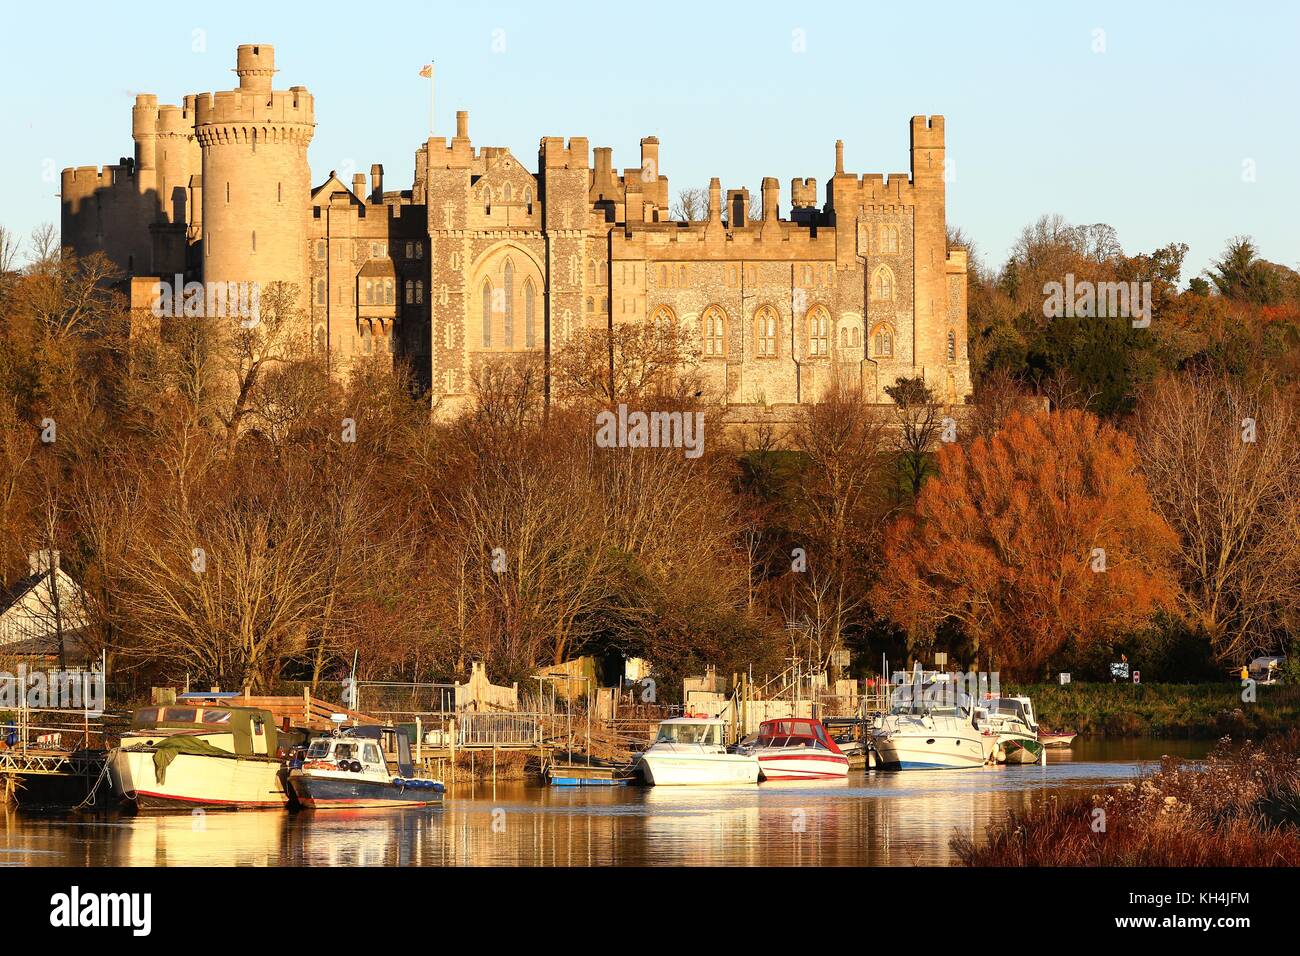 Arundel Castle and River Arun in Arundel, West Sussex. 13 Nov 2017. Picture by James Boardman Stock Photo